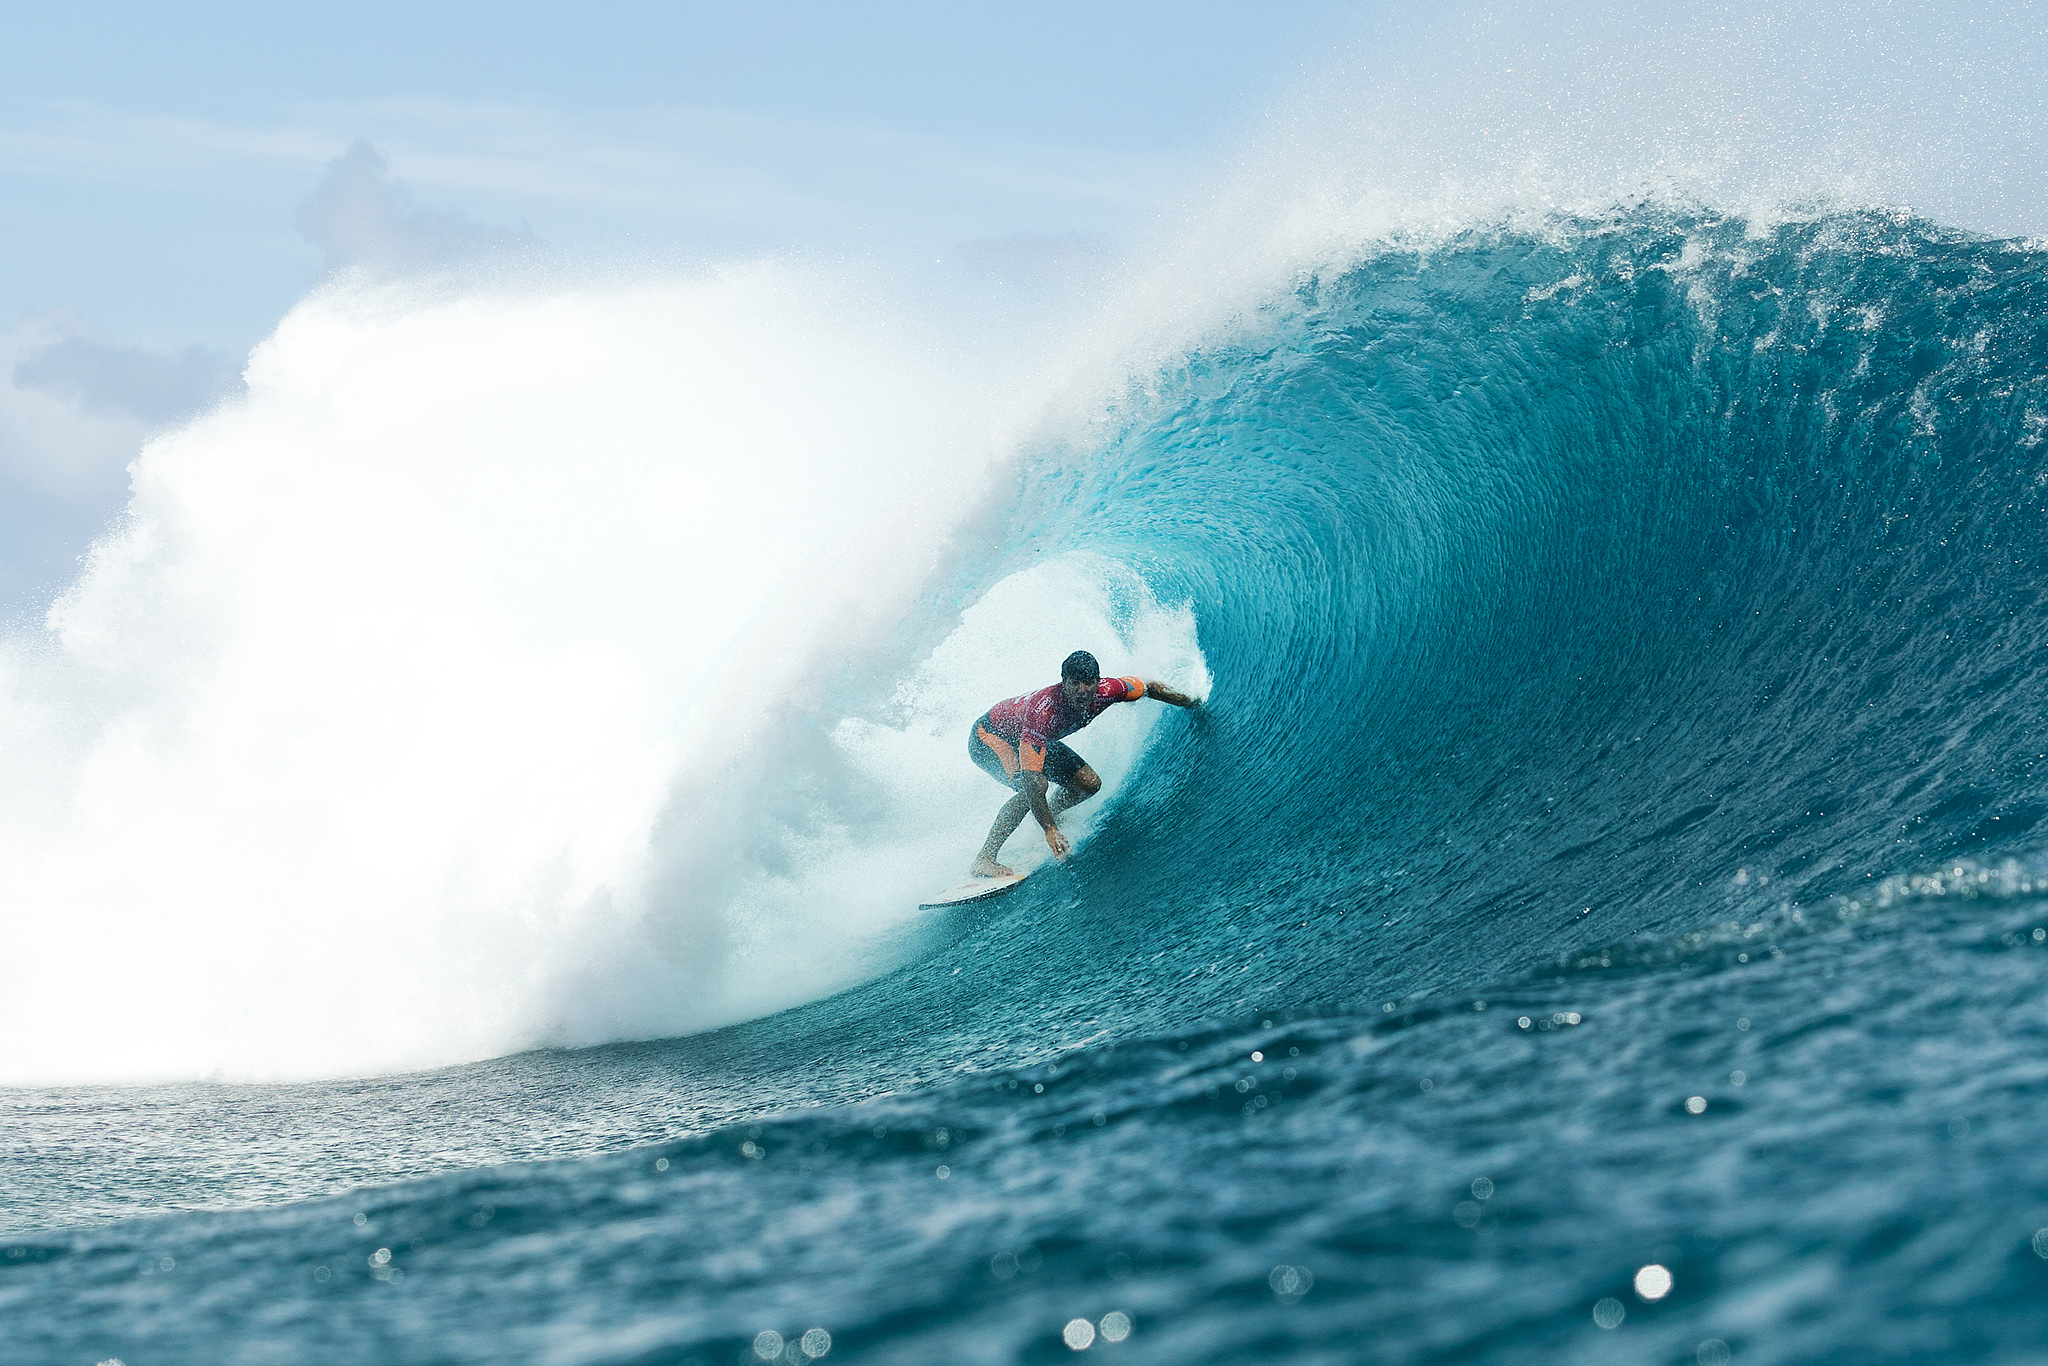 Gabriel Medina of Maresias, Sao Paulo, Brazil (pictured) placed second in the final of the Billabong Pro Tahiti after being defeated by Jeremy Flores (FRA) at Teahupoo on 25 August 2015. IMAGE CREDIT: WSL / Cestari PHOTOGRAPHER: Kelly Cestari SOCIAL MEDIA TAG: @wsl @kc80   The images attached or accessed by link within this email ("Images") are hand-out images from the Association of Surfing Professionals LLC ("World Surf League"). All Images are royalty-free but for editorial use only. No commercial or other rights are granted to the Images in any way. The Images are provided on an "as is" basis and no warranty is provided for use of a particular purpose. Rights to an individual within an Image are not provided. Copyright to the Images is owned by World Surf League. Sale or license of the Images is prohibited. ALL RIGHTS RESERVED.